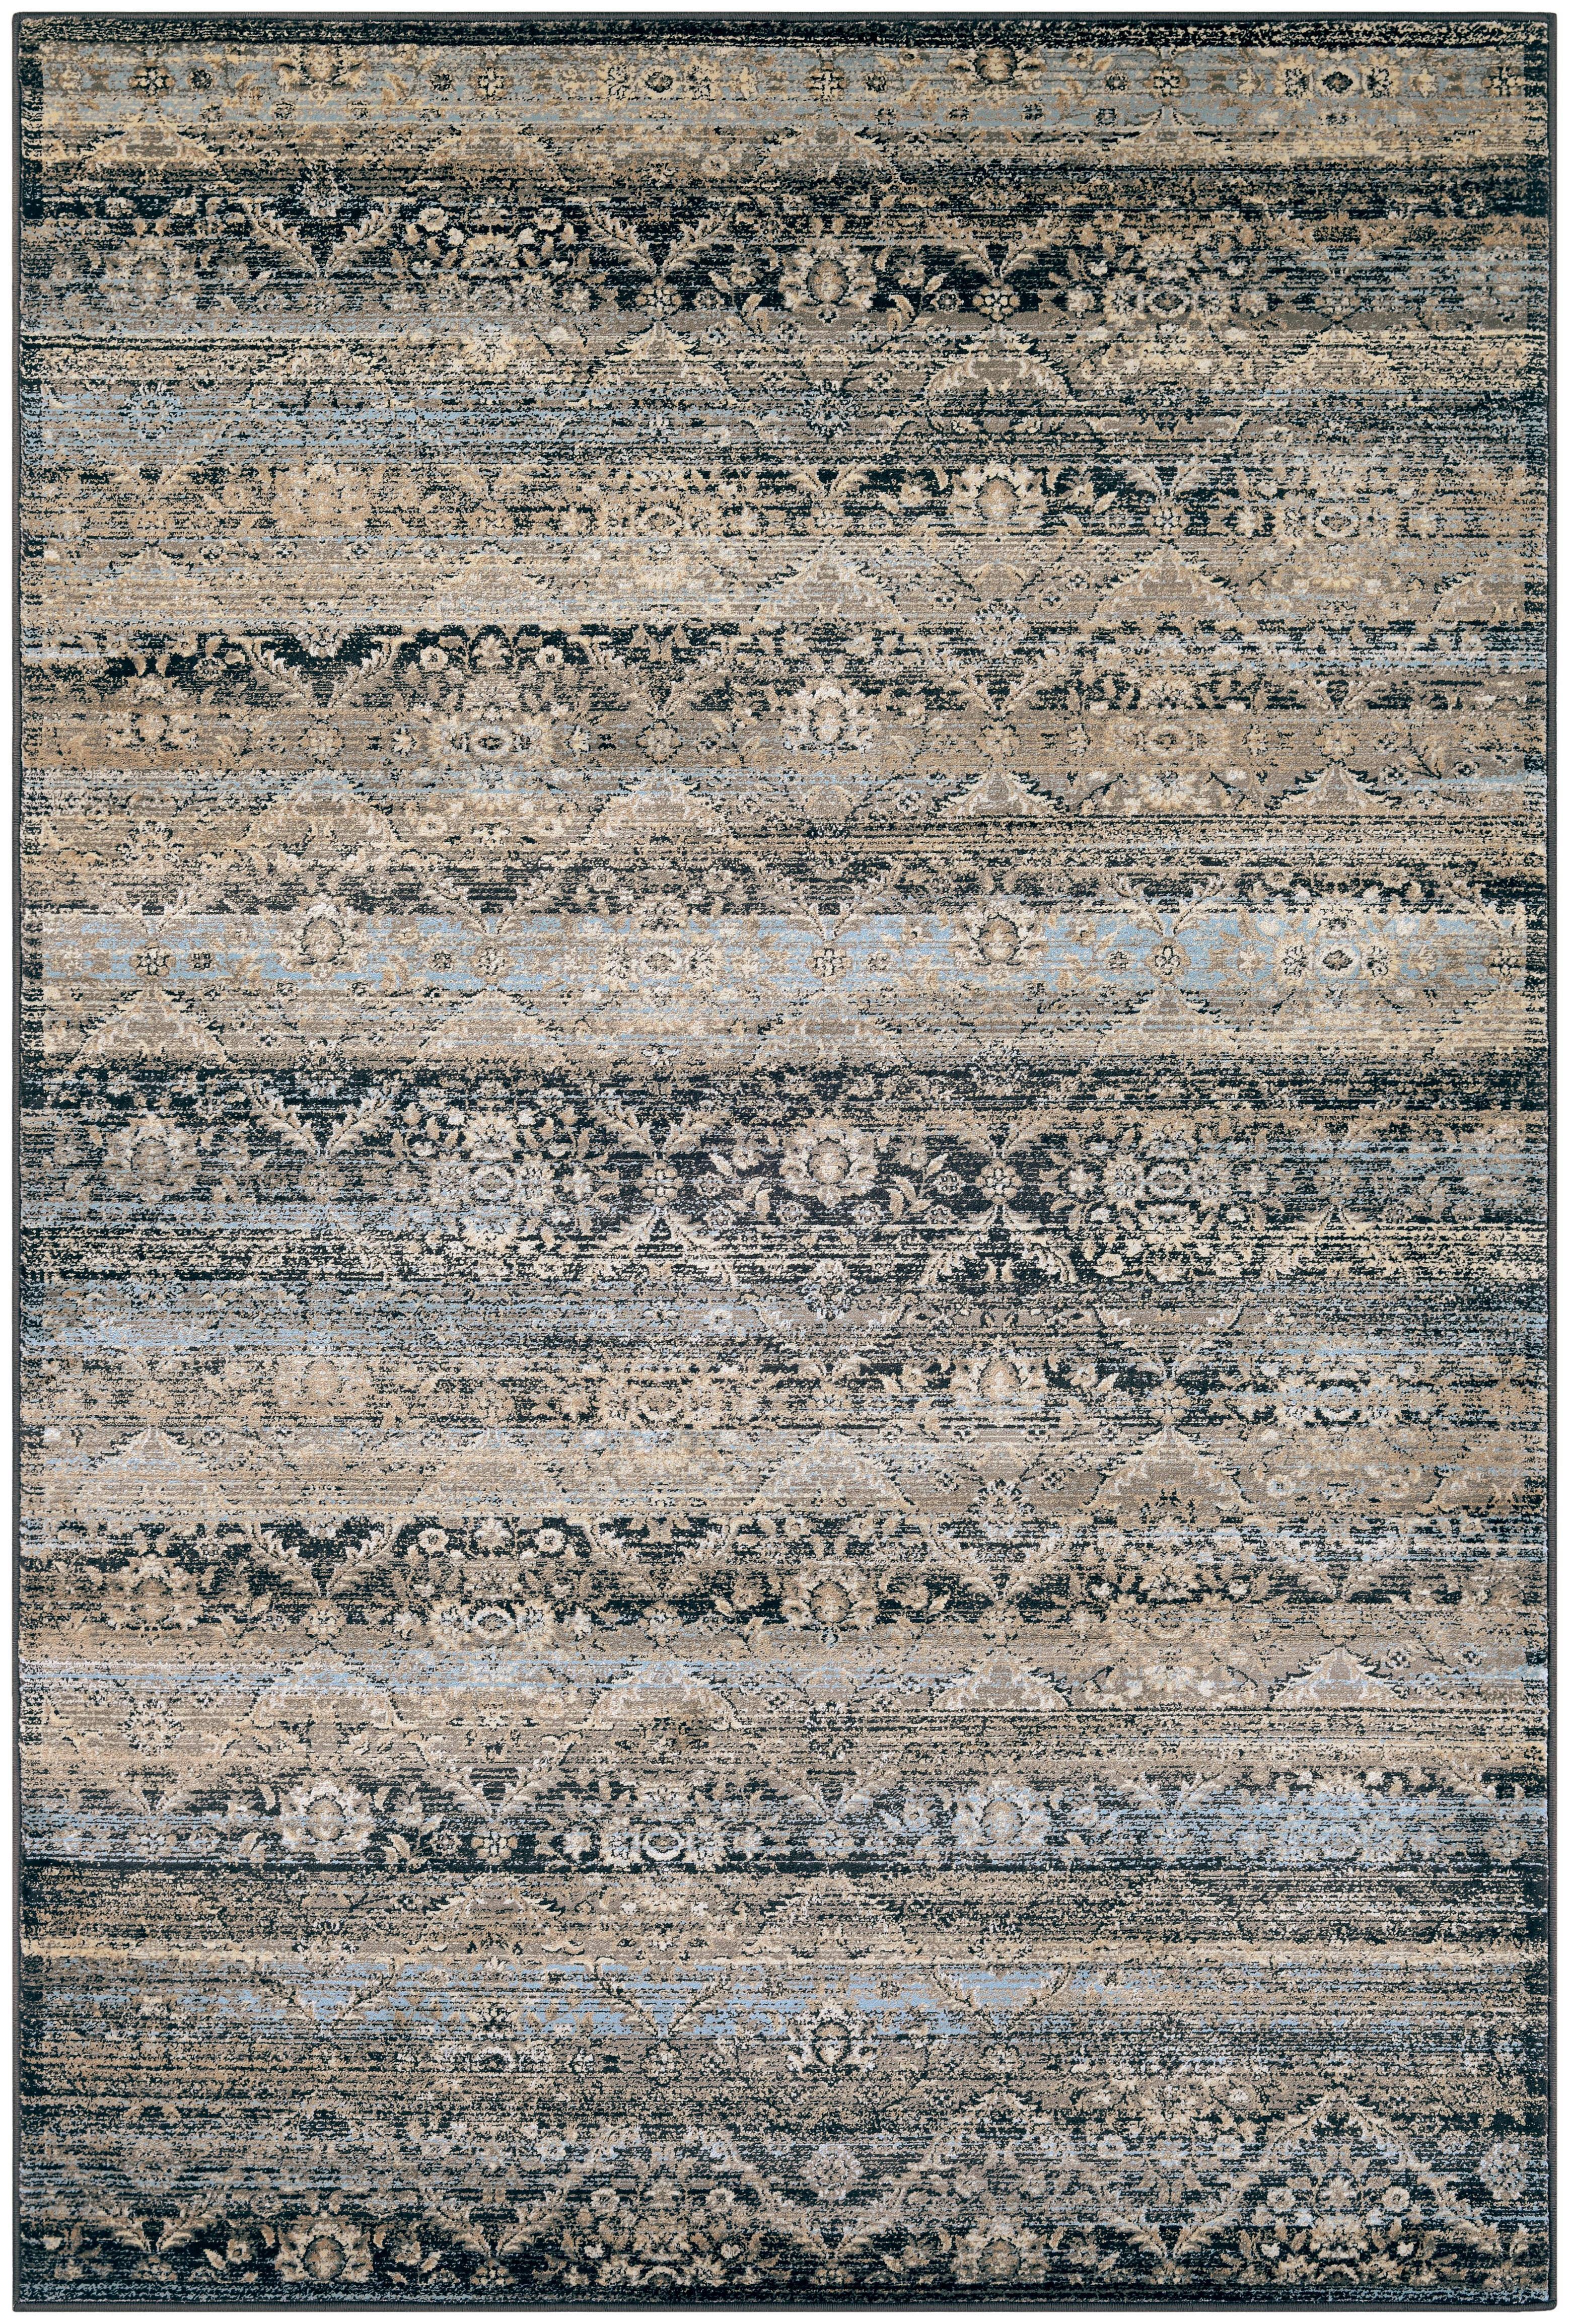 Modern Rustic Black and Light Blue Synthetic Area Rug, 7'10" x 11'2"